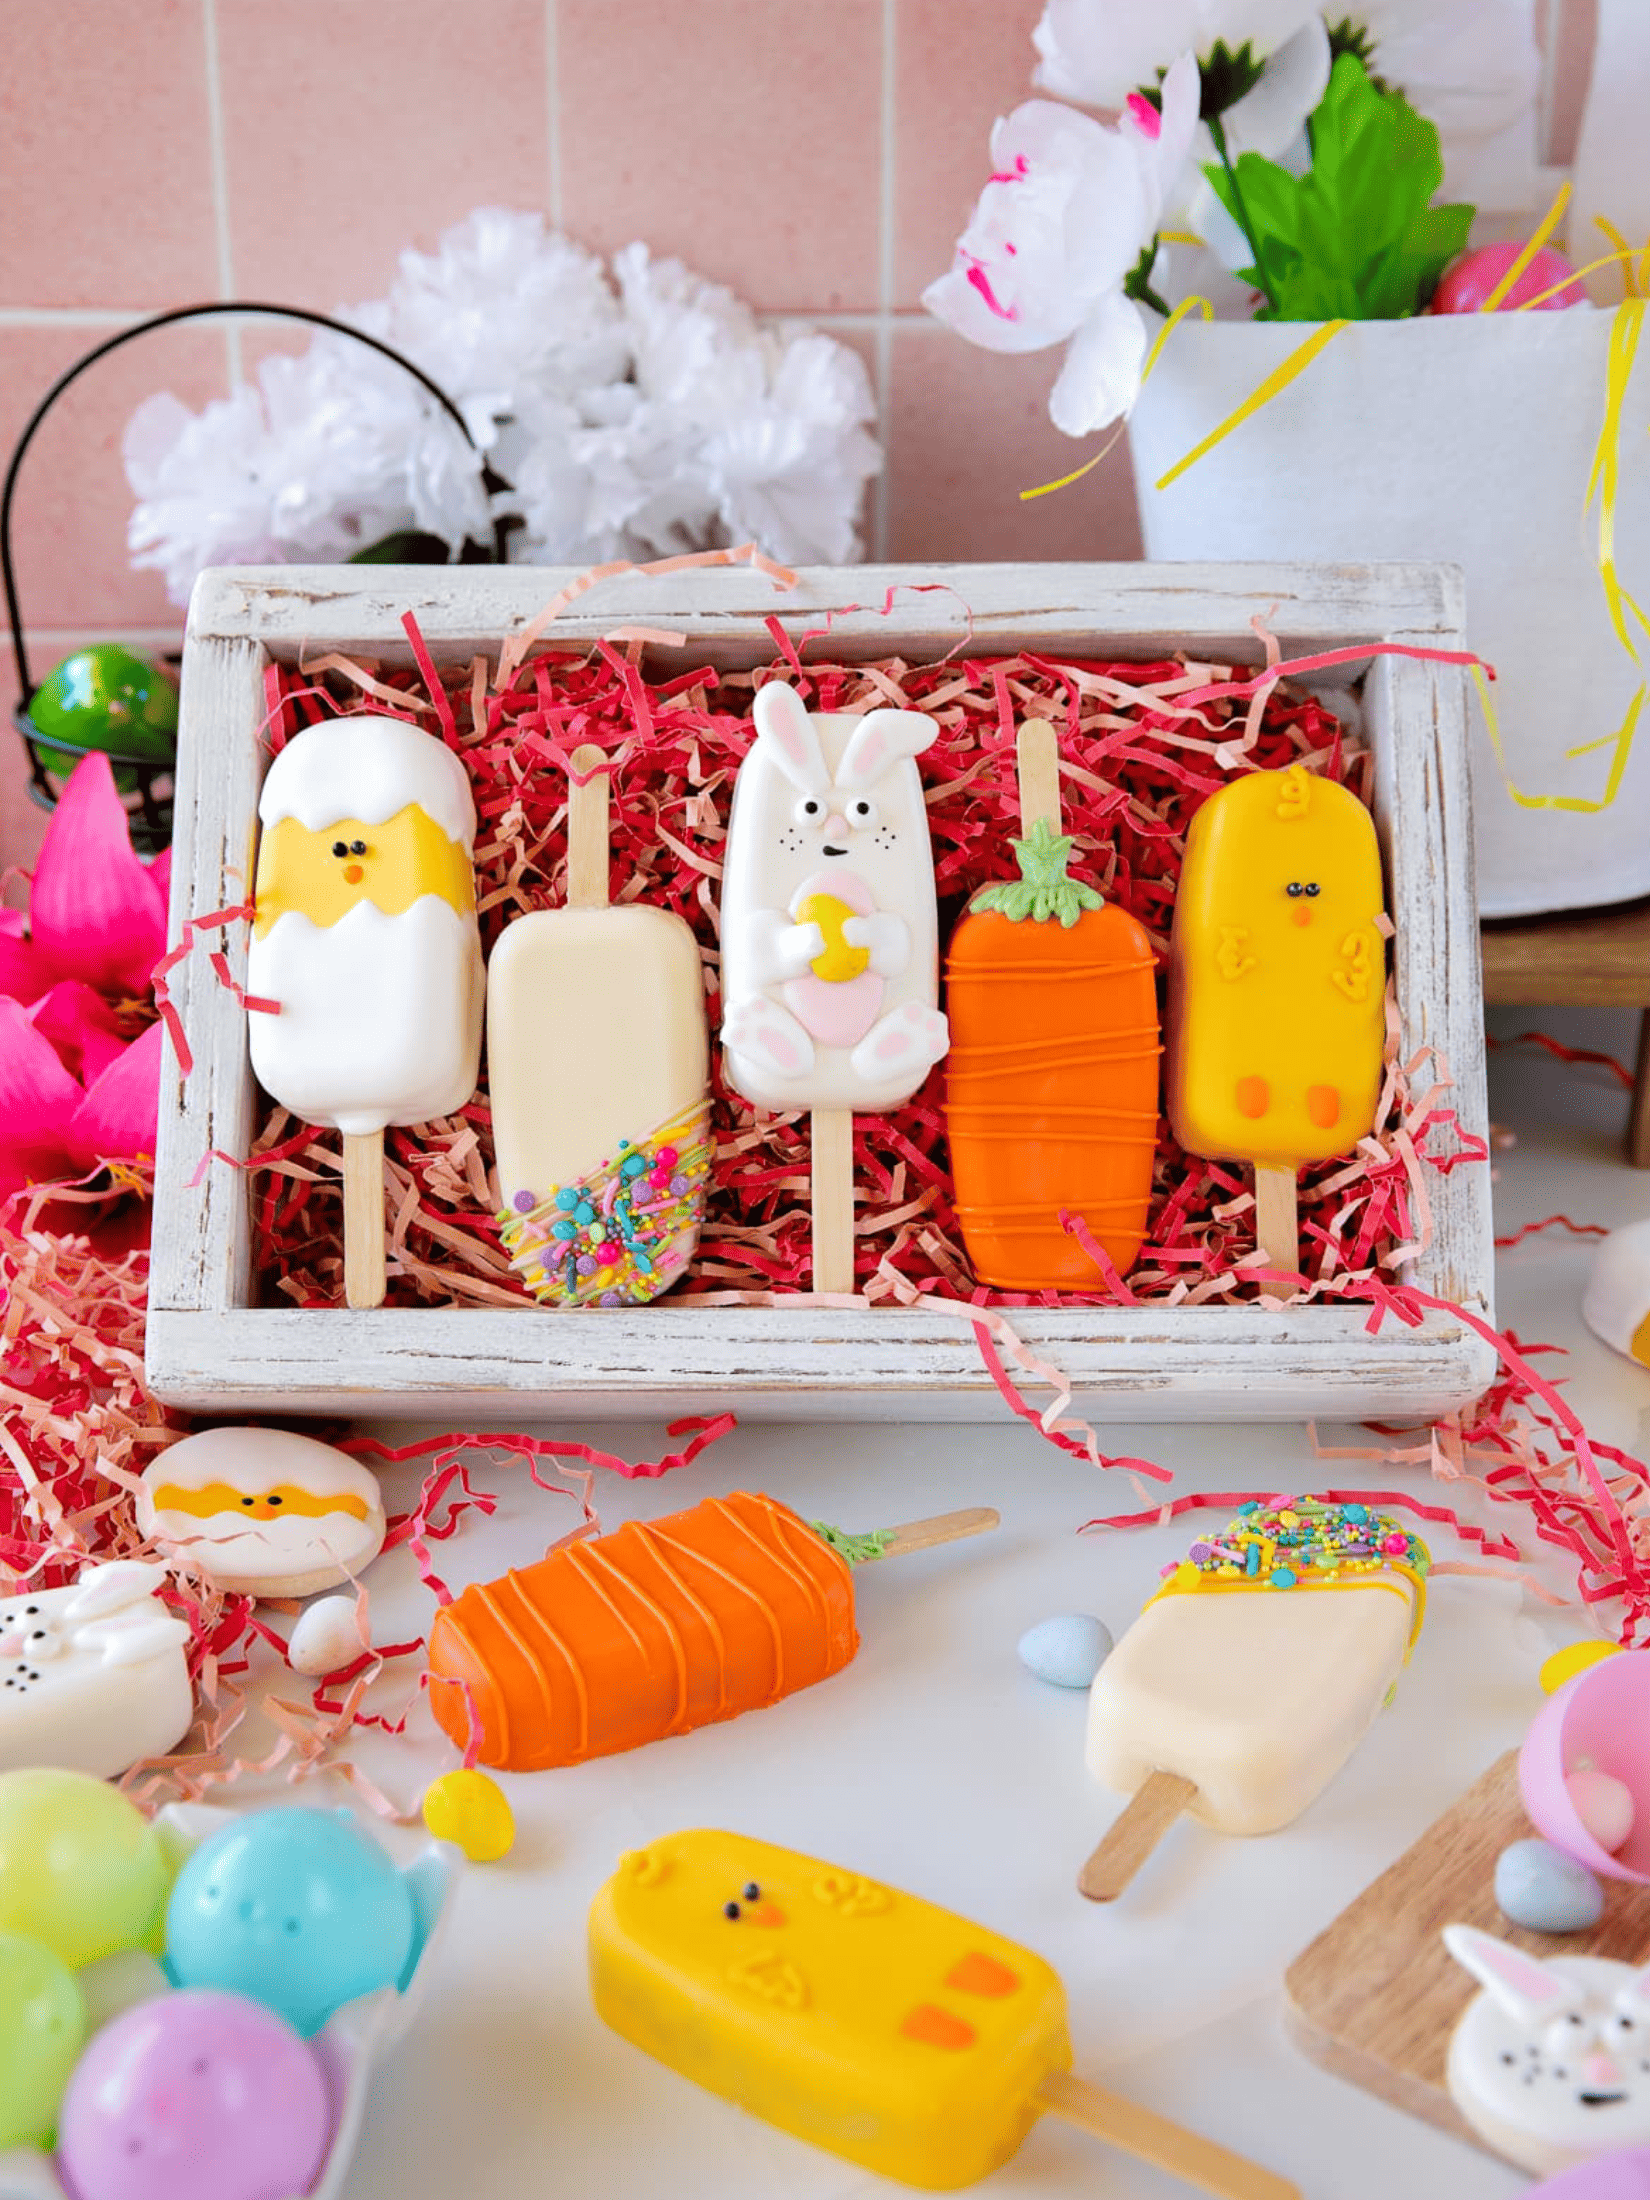 colorful Easter-themed cakesicles with decorative frosting.